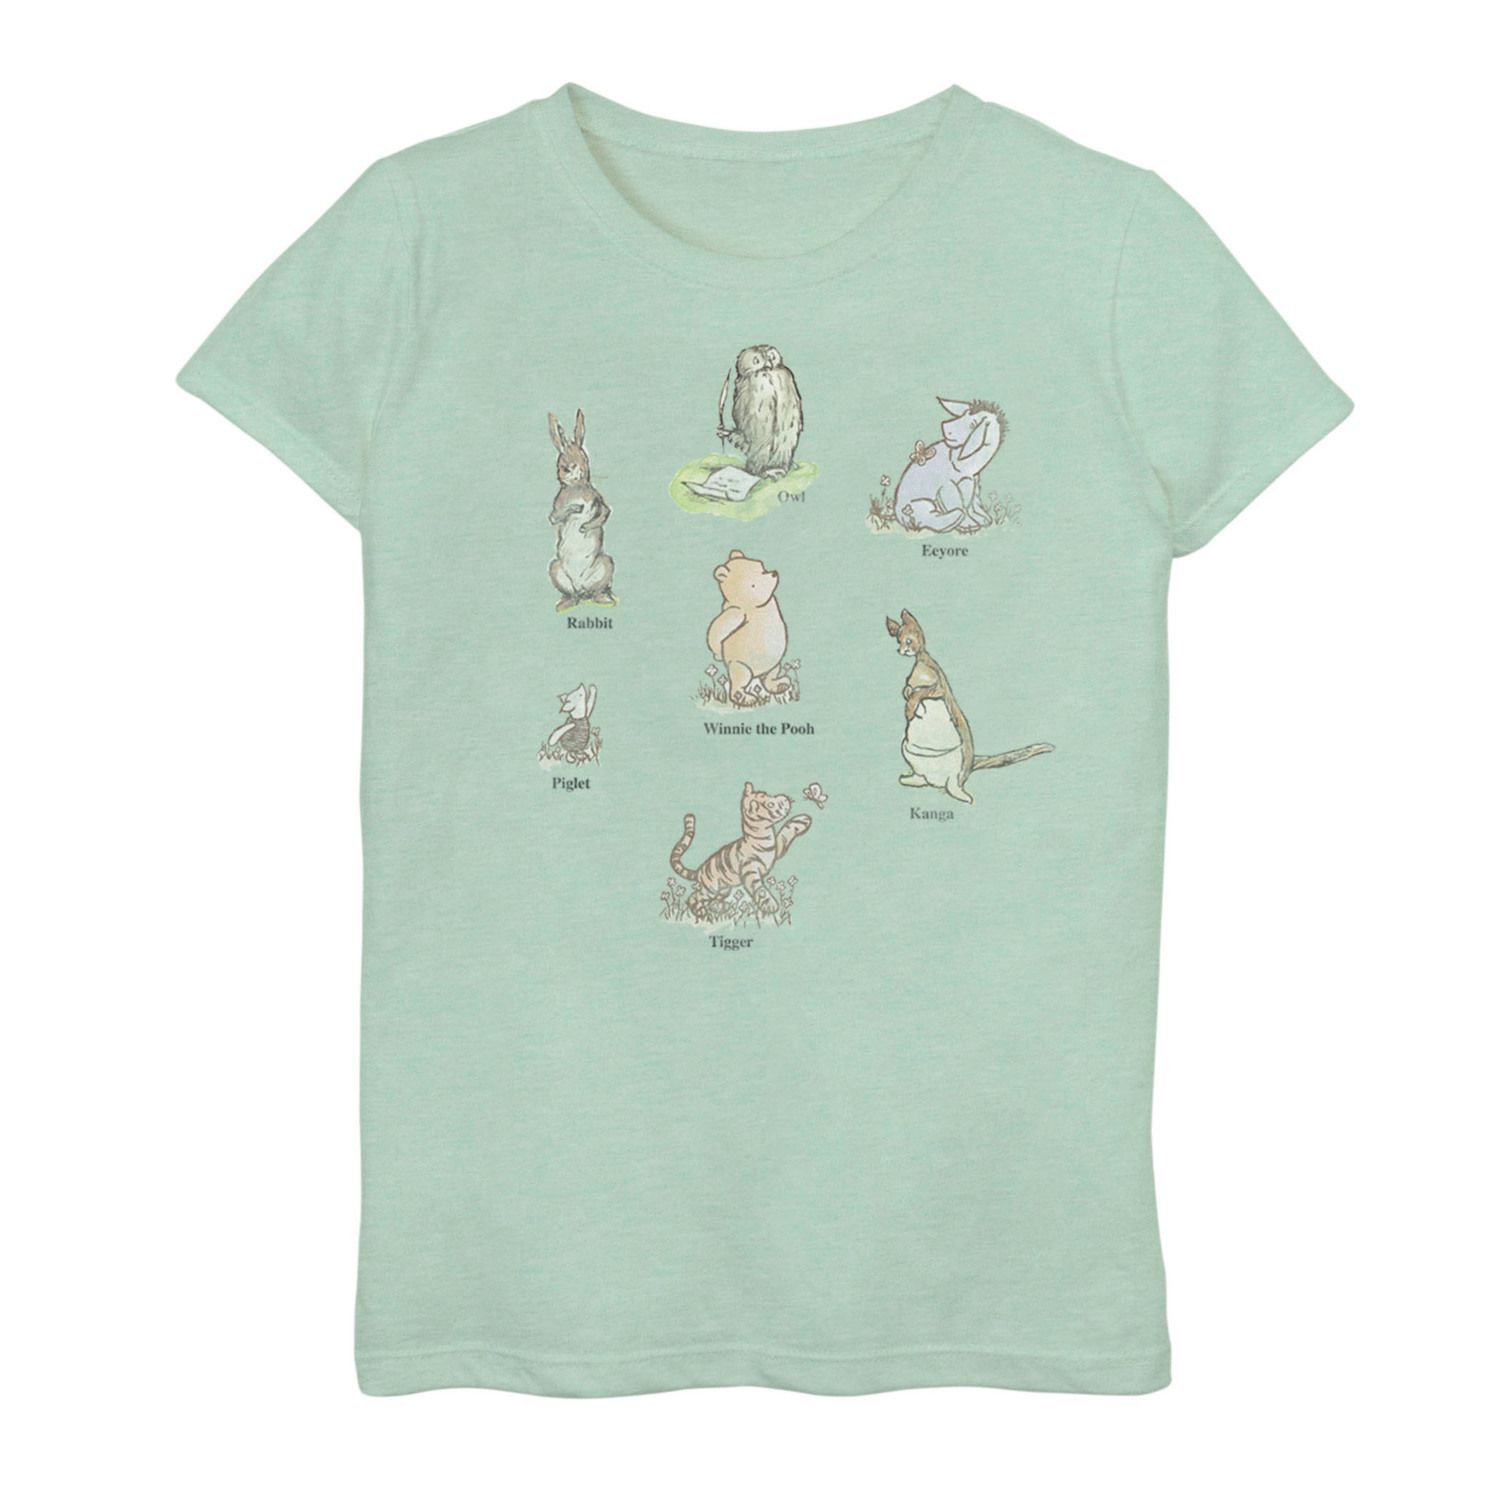 Image for Disney 's Winnie The Pooh Girls 7-16 Classic Group Shot Graphic Tee at Kohl's.